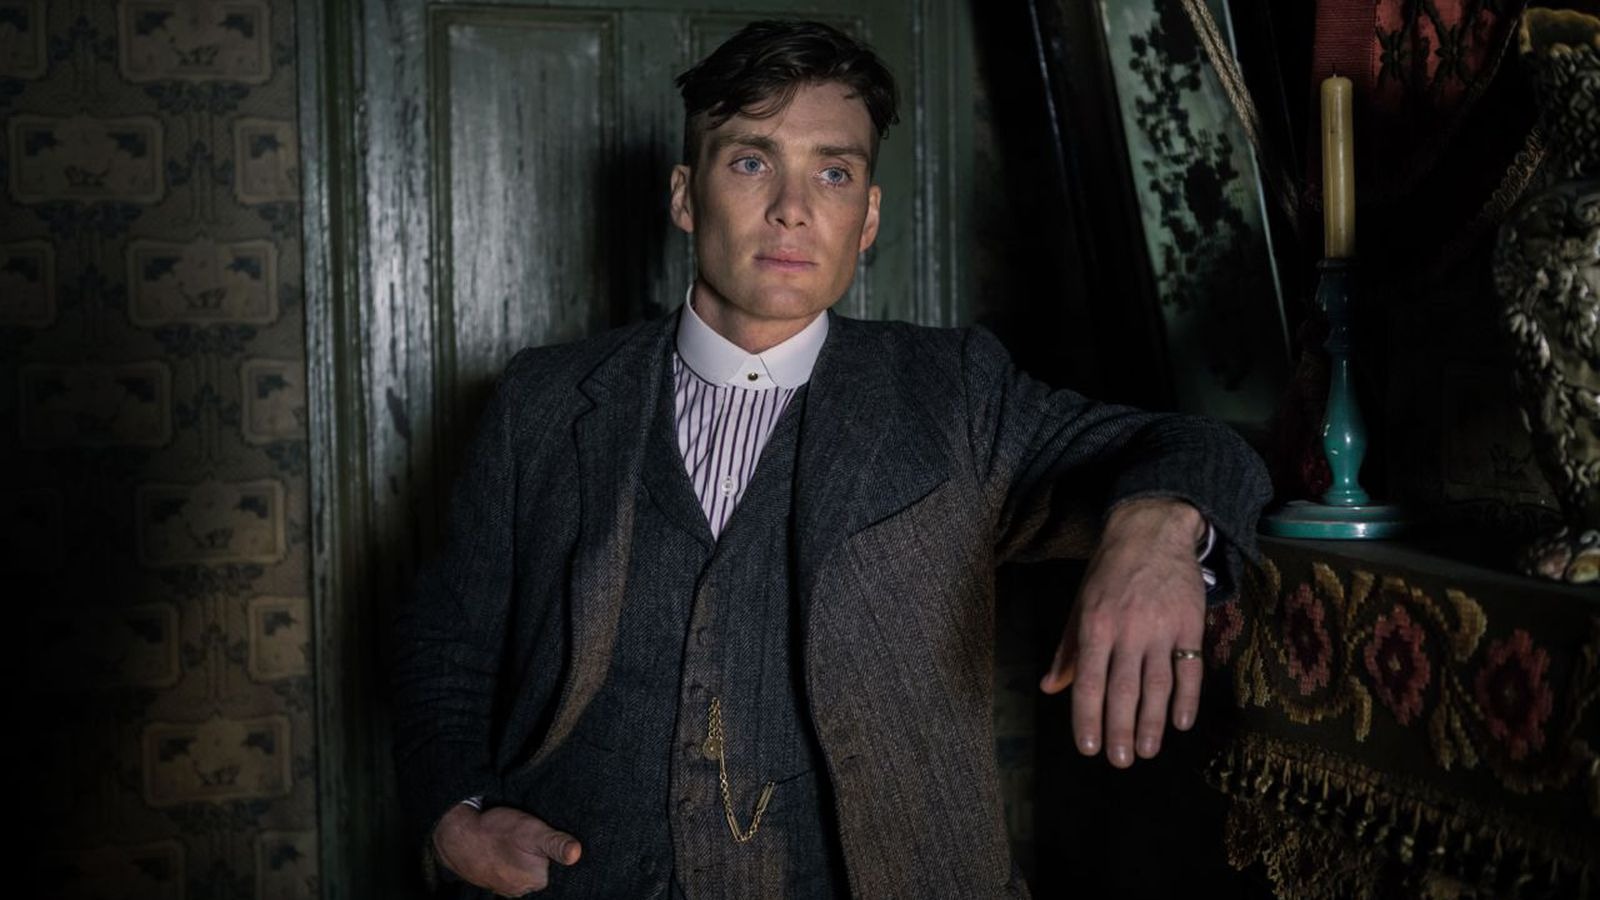 #Peaky Blinders: Series Creator Steven Knight Gives an Update on the British Crime Drama Movie